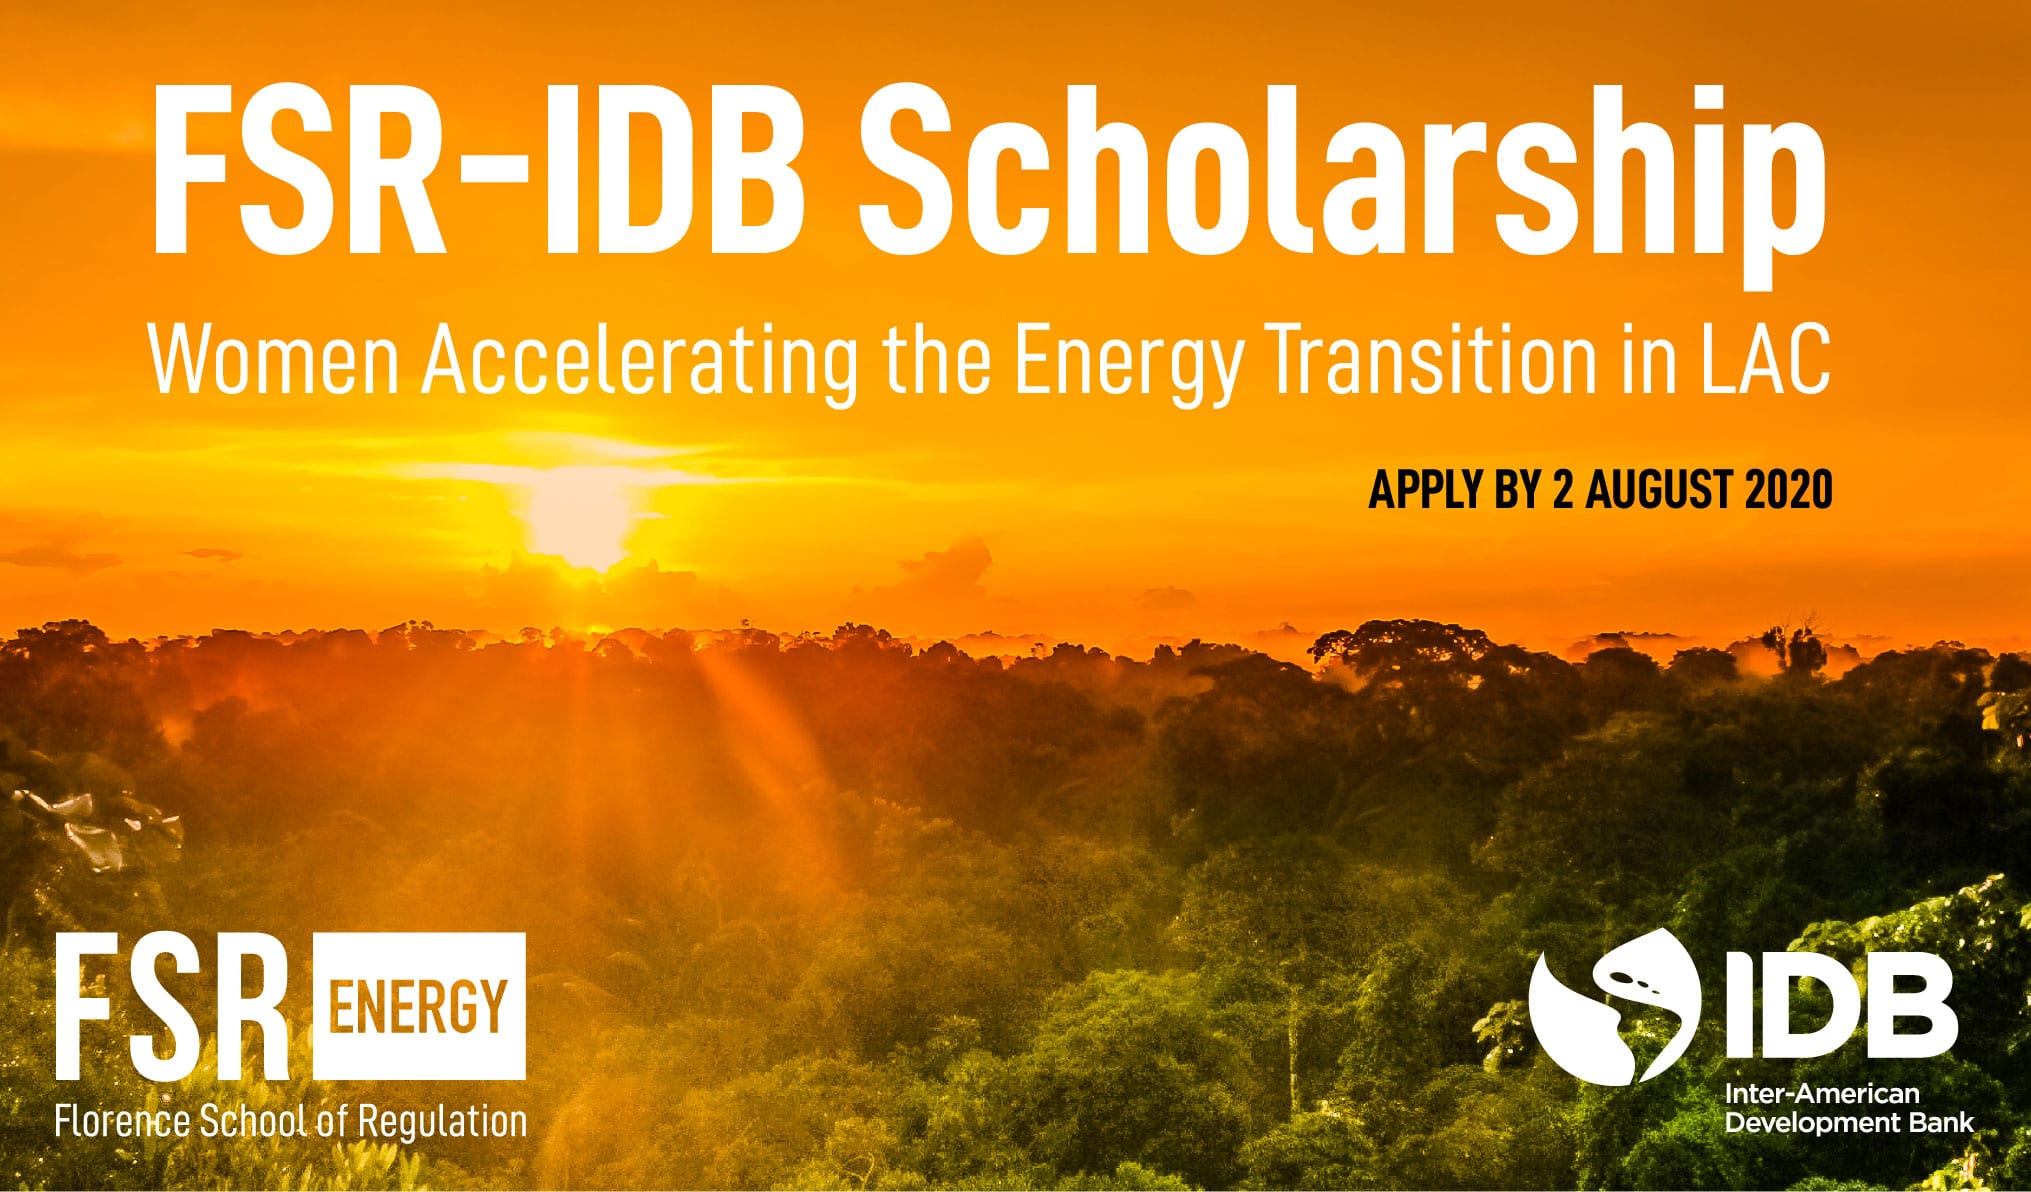 Scholarship: Women Accelerating the Energy Transition in LAC